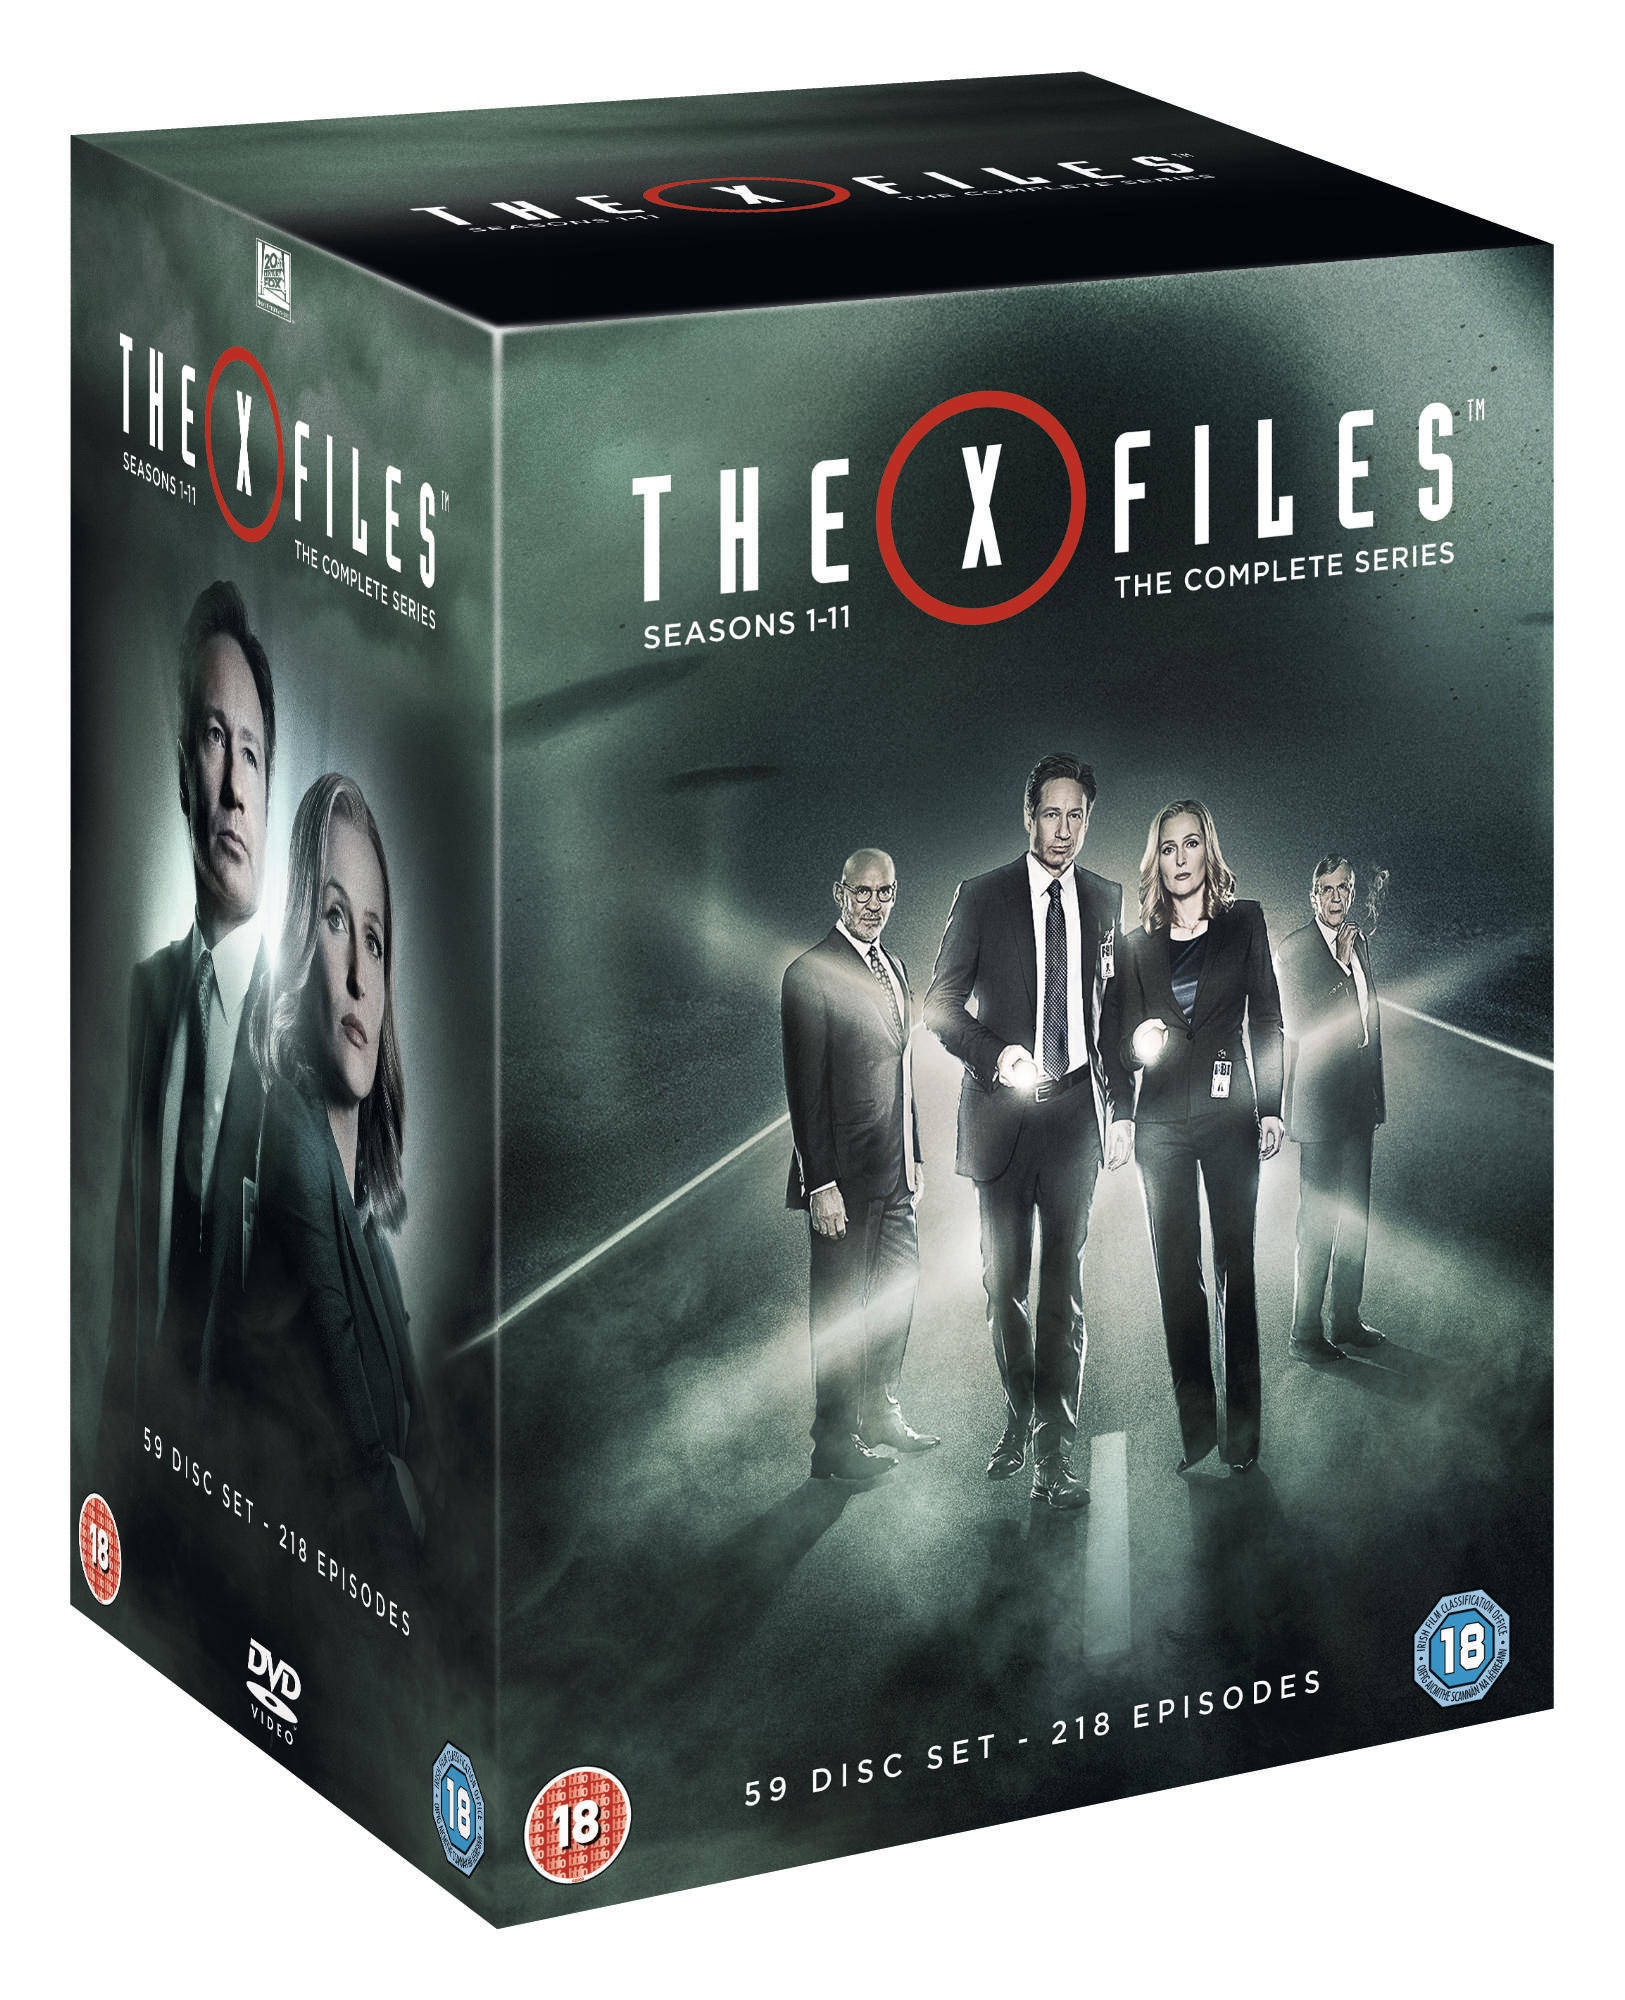 The X-Files Complete Series: Seasons 1-11 - Fetch Publicity